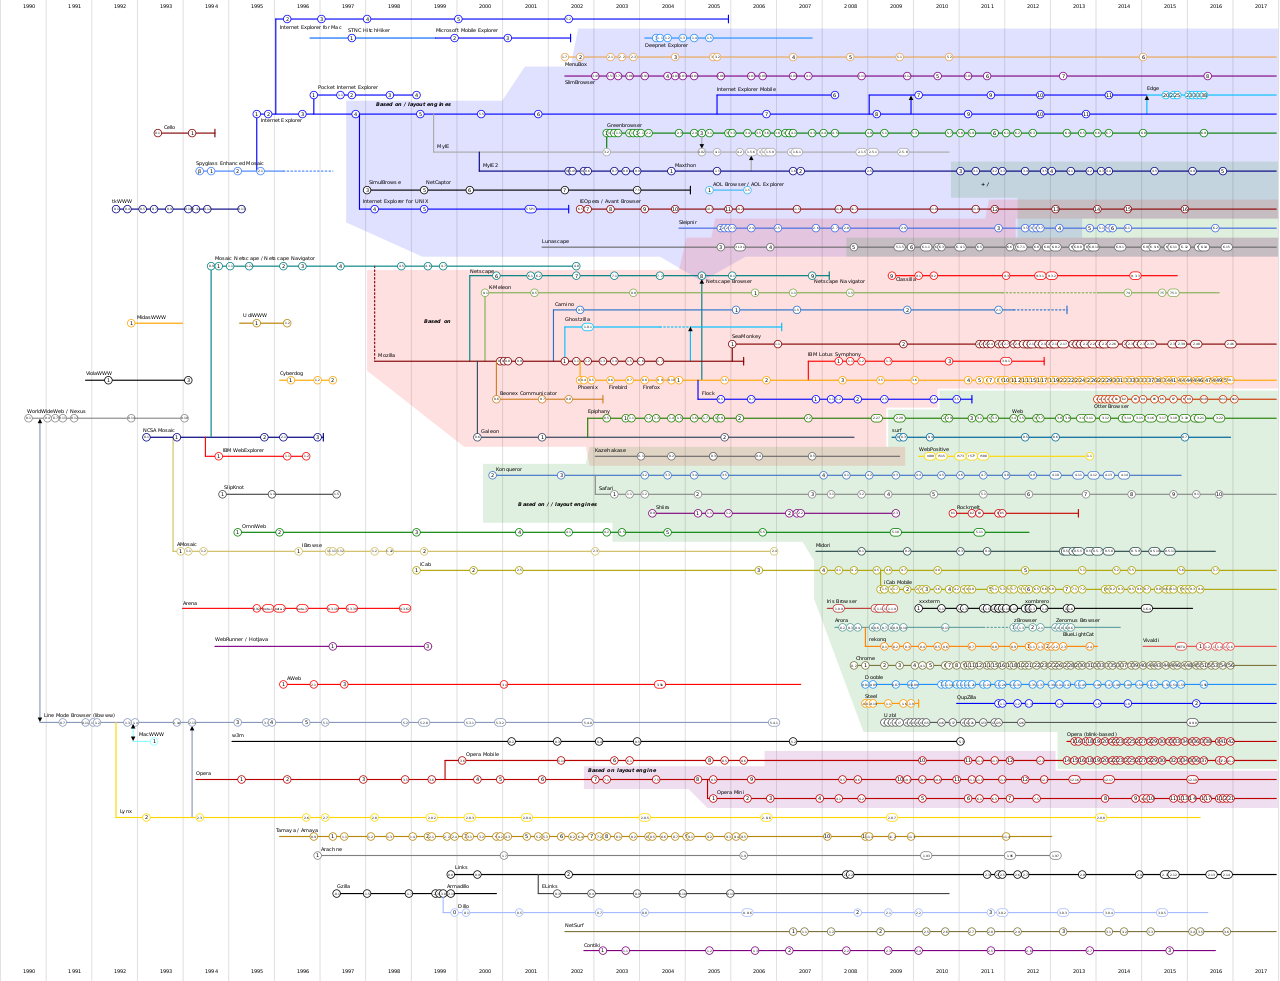 timeline-of-web-browsers